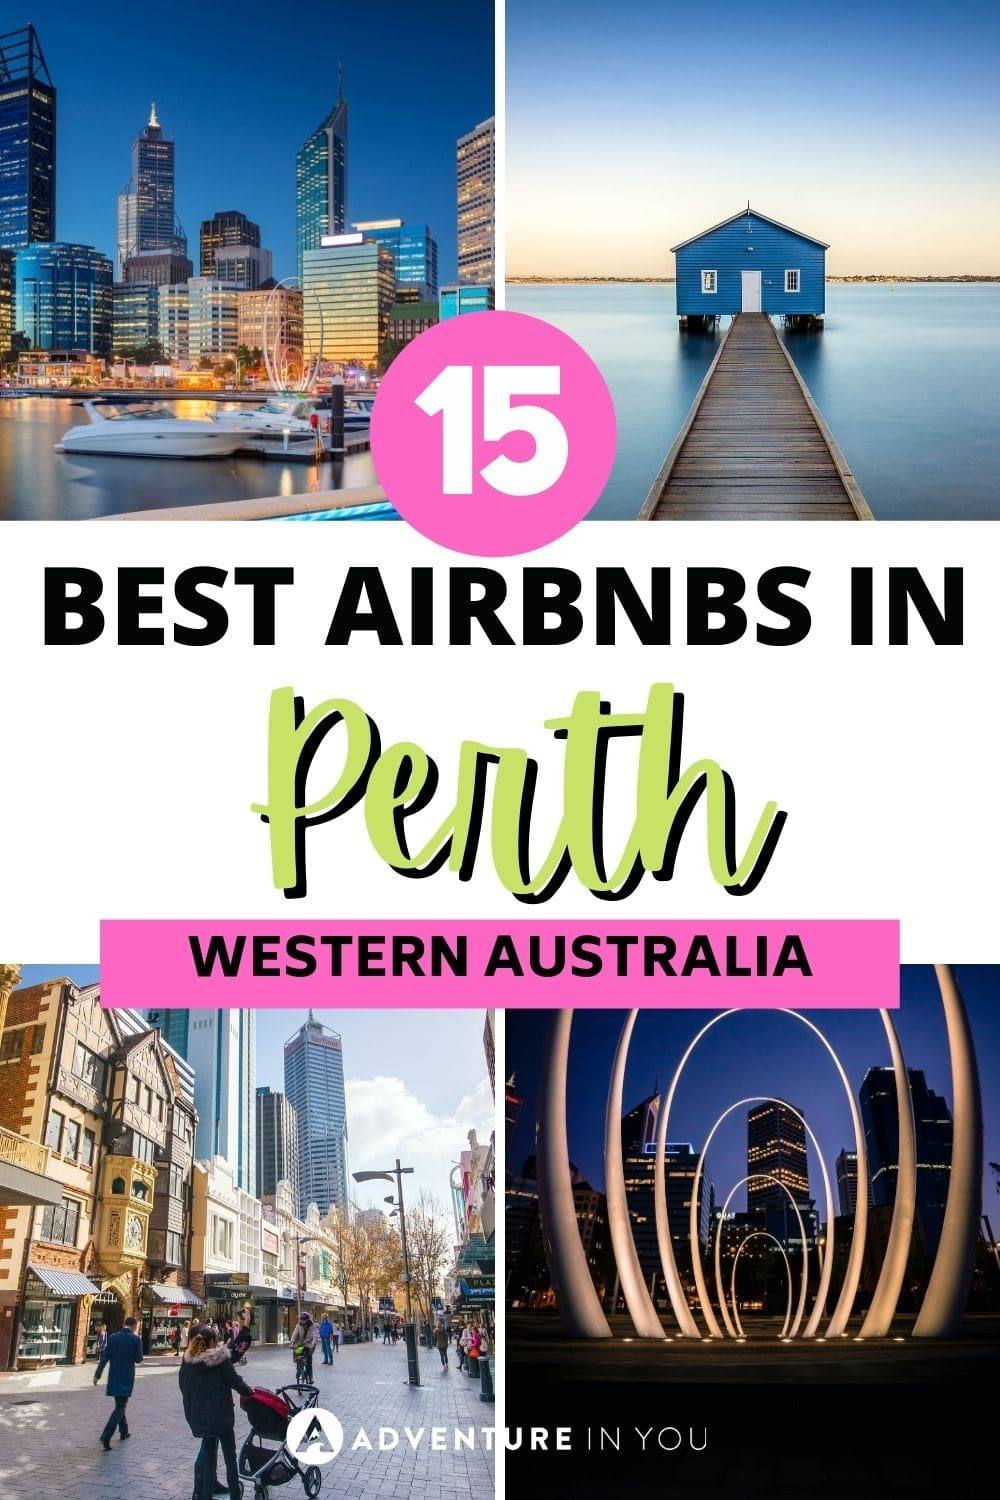 Airbnbs in Perth | Looking for the best Airbnbs in Perth Click here to see our top picks. #westernaustralia #perth #wheretostayinperth